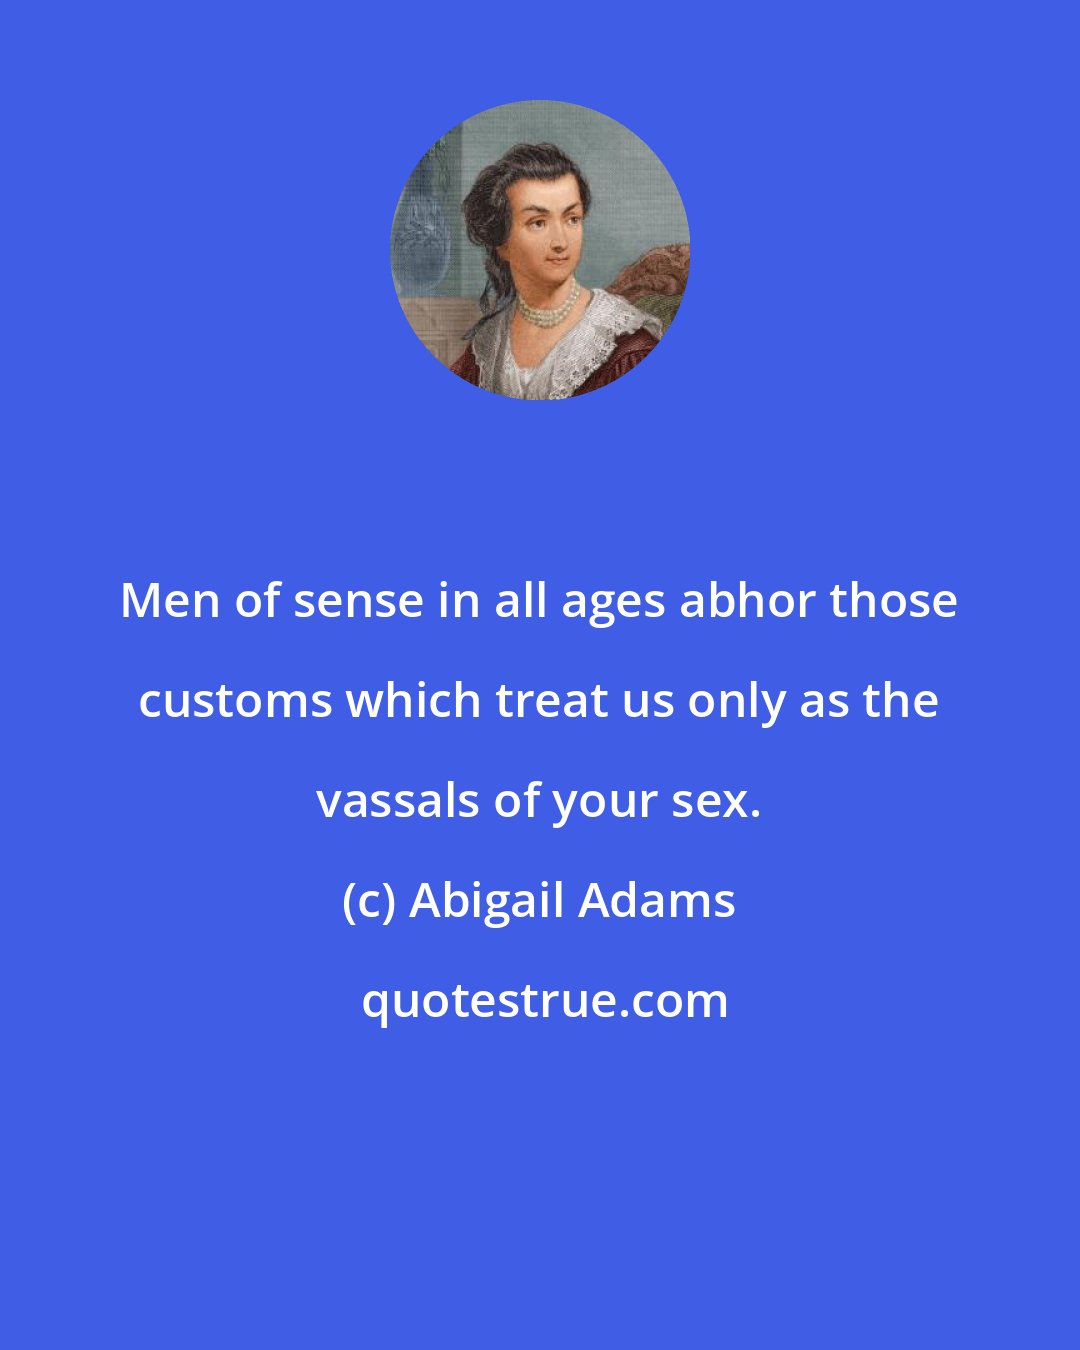 Abigail Adams: Men of sense in all ages abhor those customs which treat us only as the vassals of your sex.